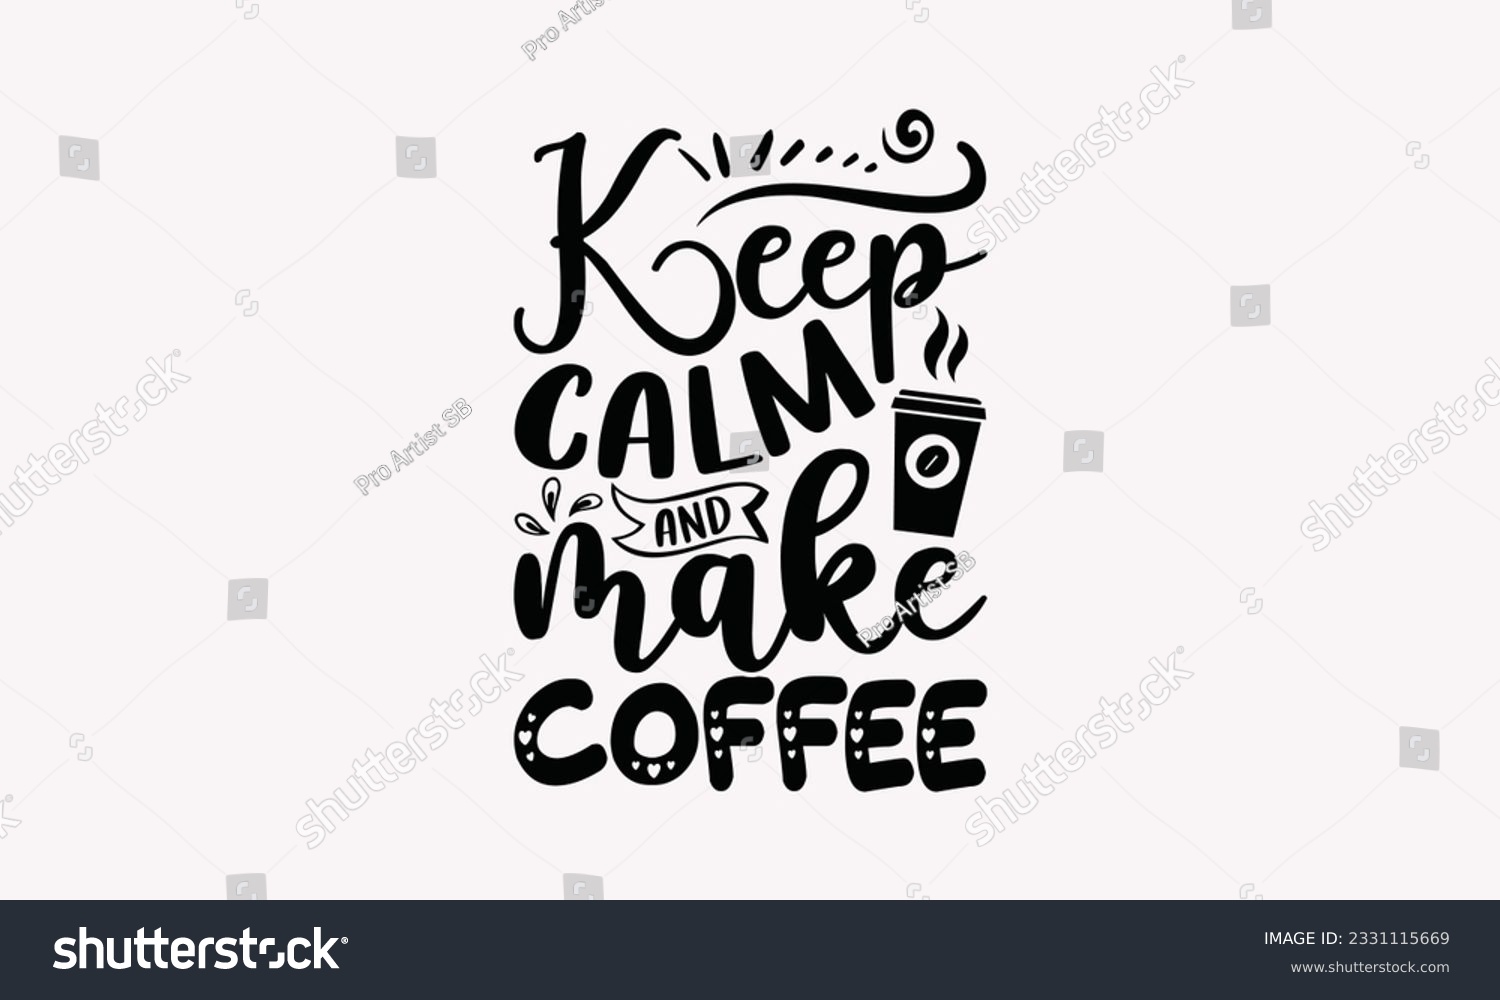 SVG of Keep calm and make coffee - Coffee SVG Design Template, Cheer Quotes, Hand drawn lettering phrase, Isolated on white background. svg